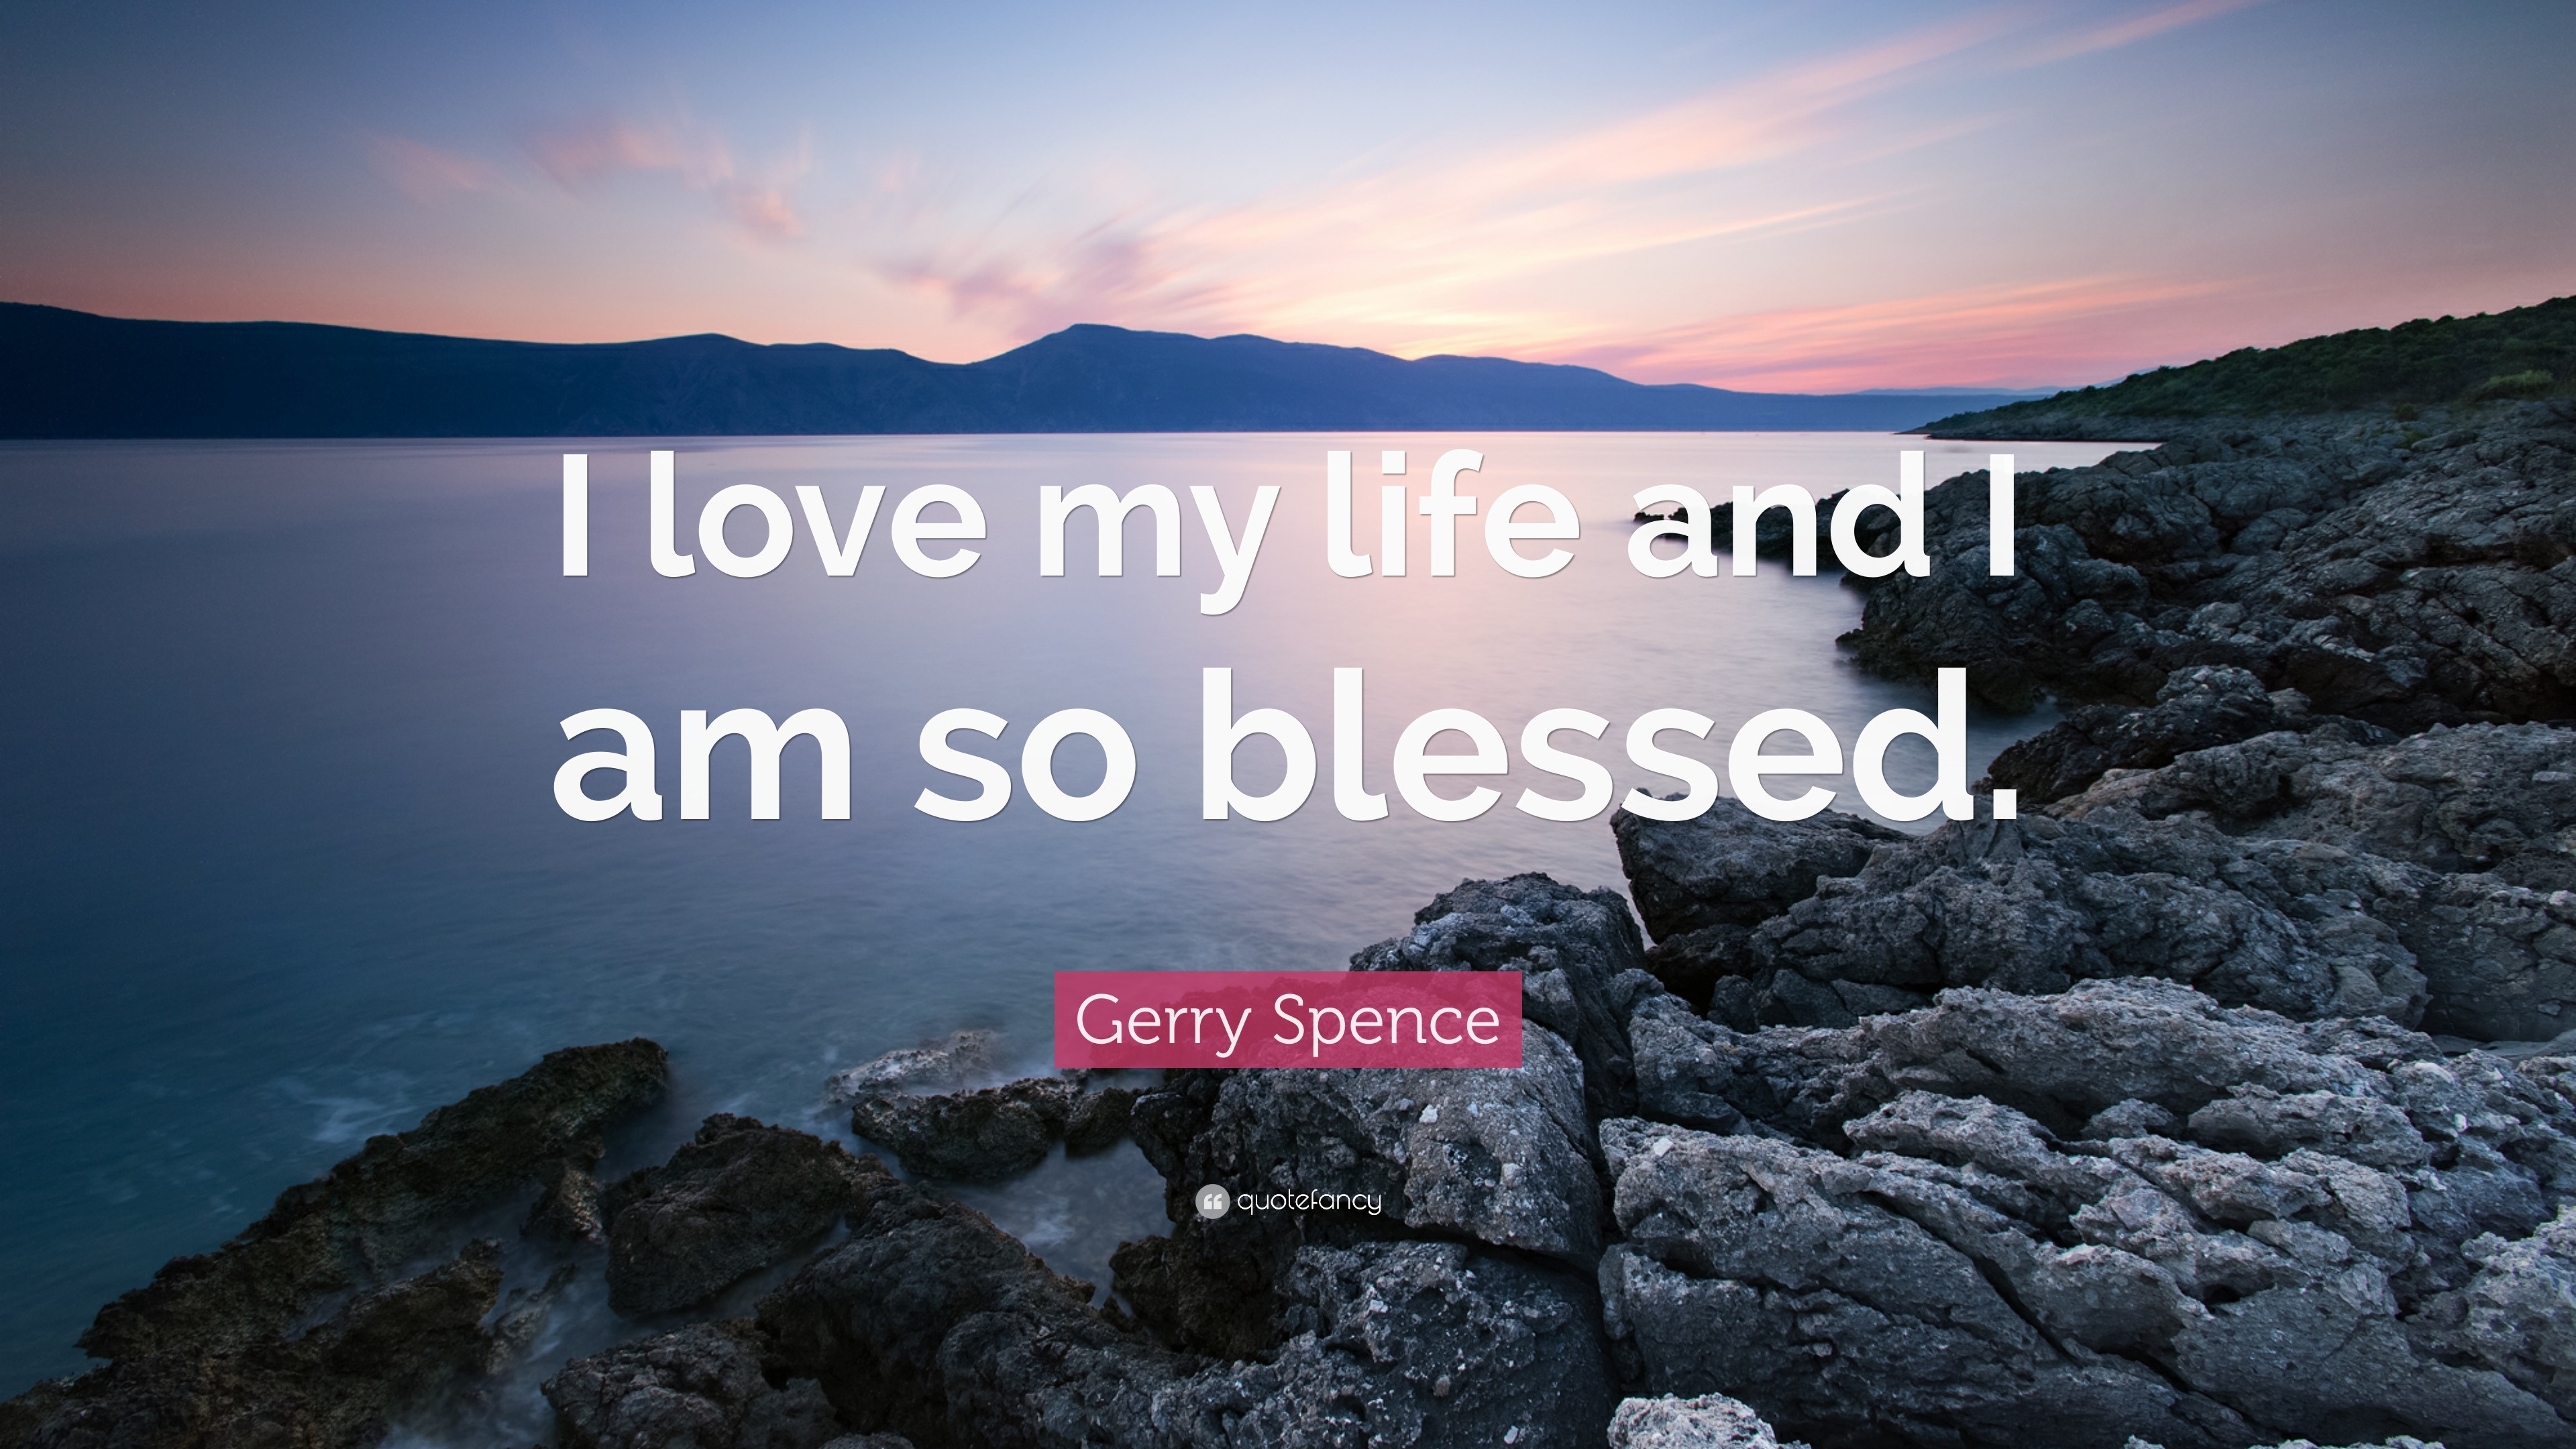 Gerry Spence Quote I Love My Life And I Am So Blessed 9 Wallpapers Quotefancy